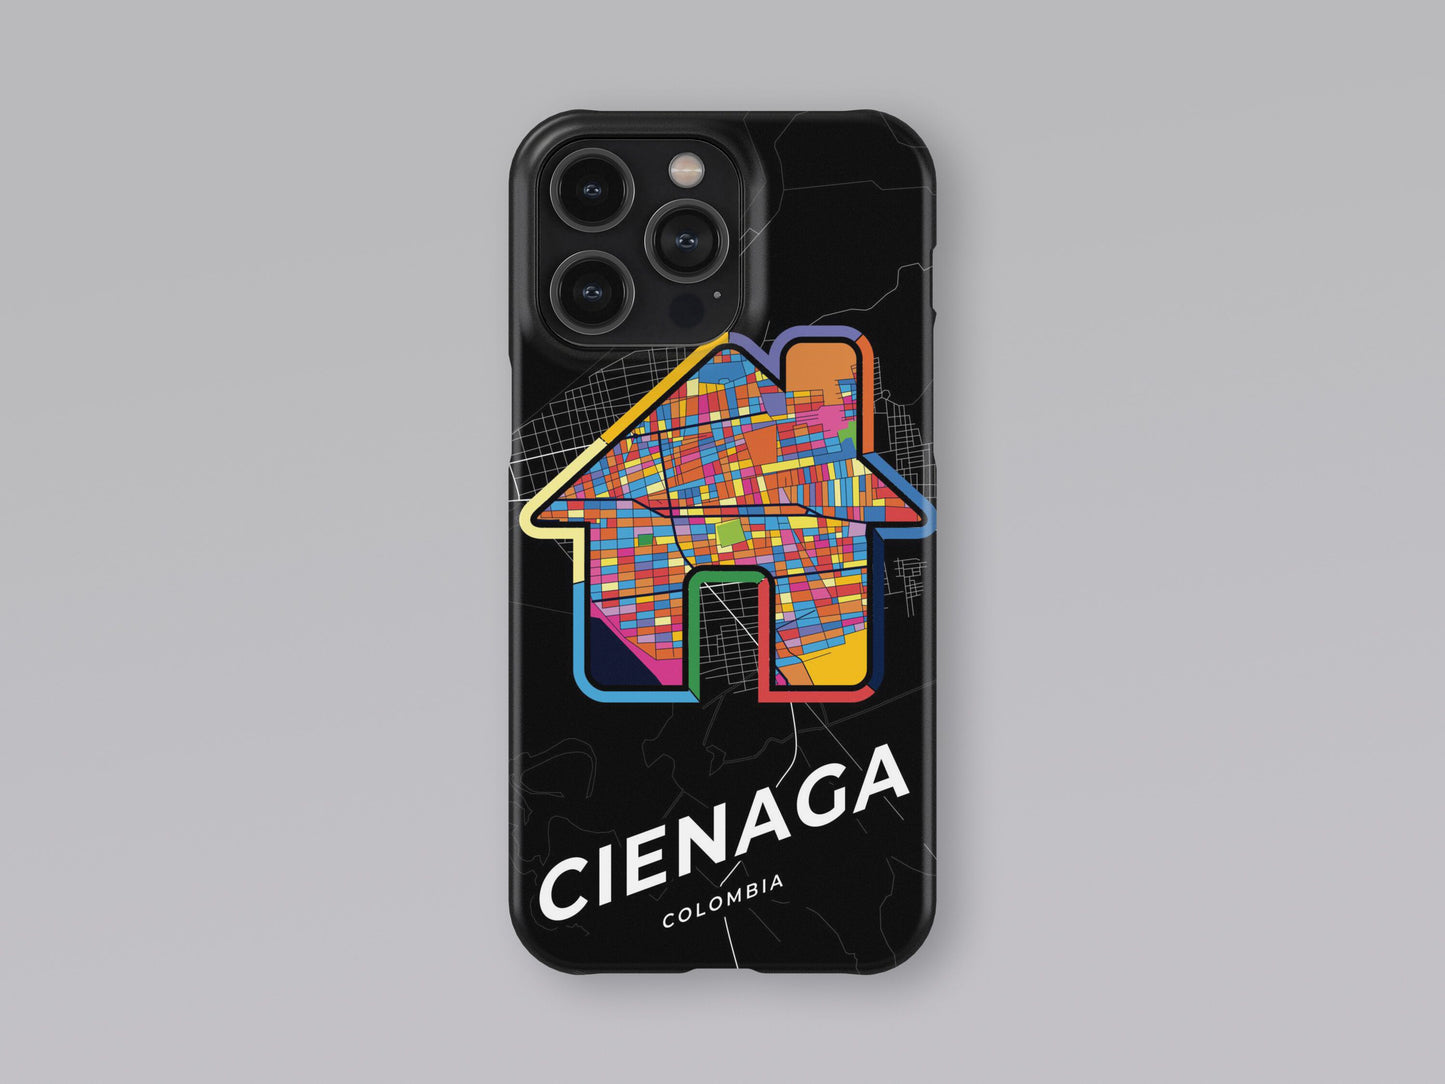 Cienaga Colombia slim phone case with colorful icon. Birthday, wedding or housewarming gift. Couple match cases. 3